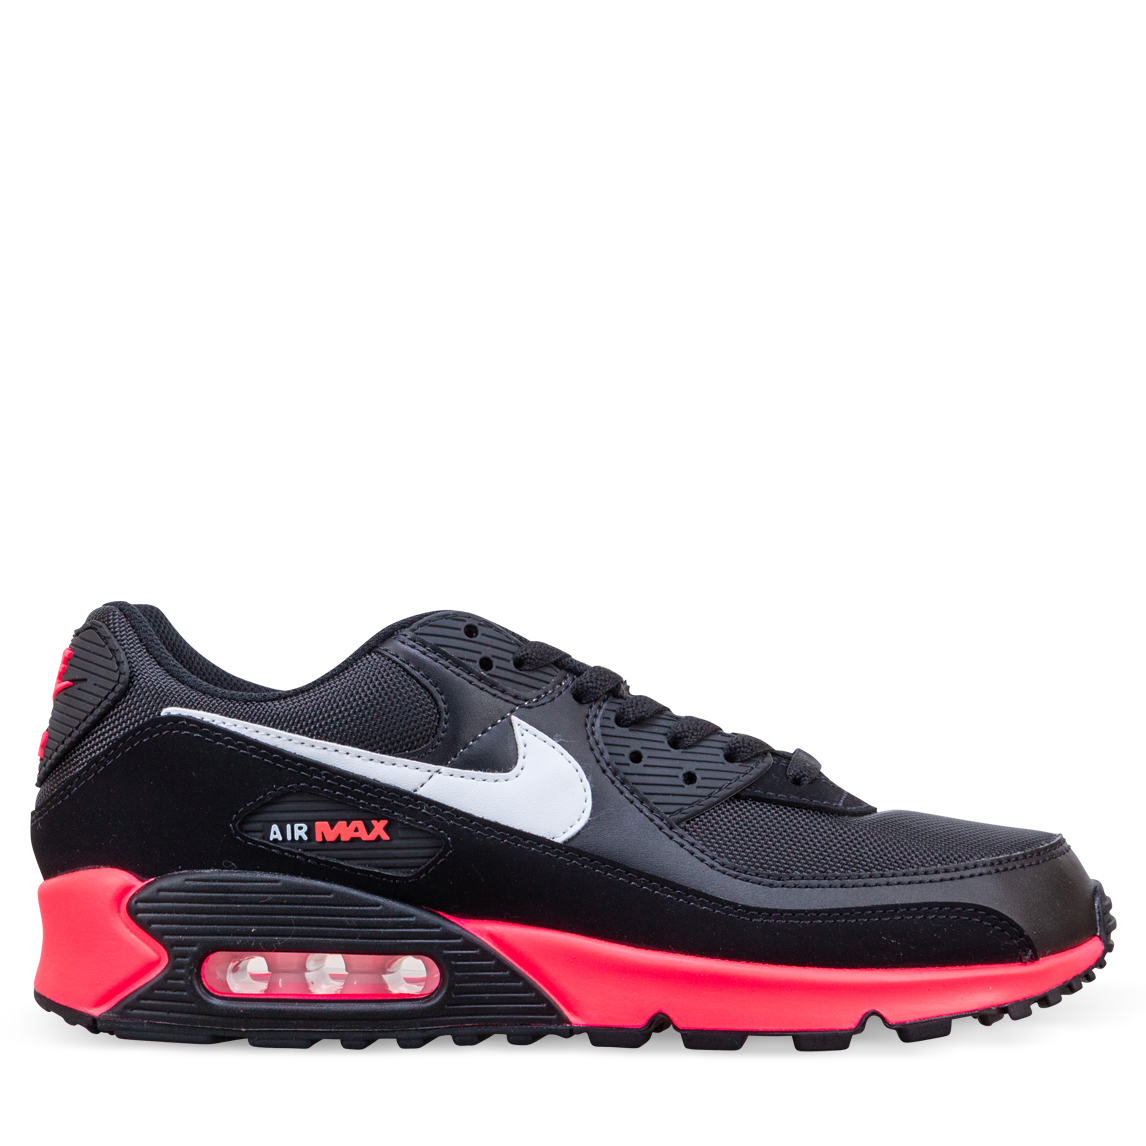 Men's Nike Air Max 90 Casual Shoes| JD Sports, 51% OFF